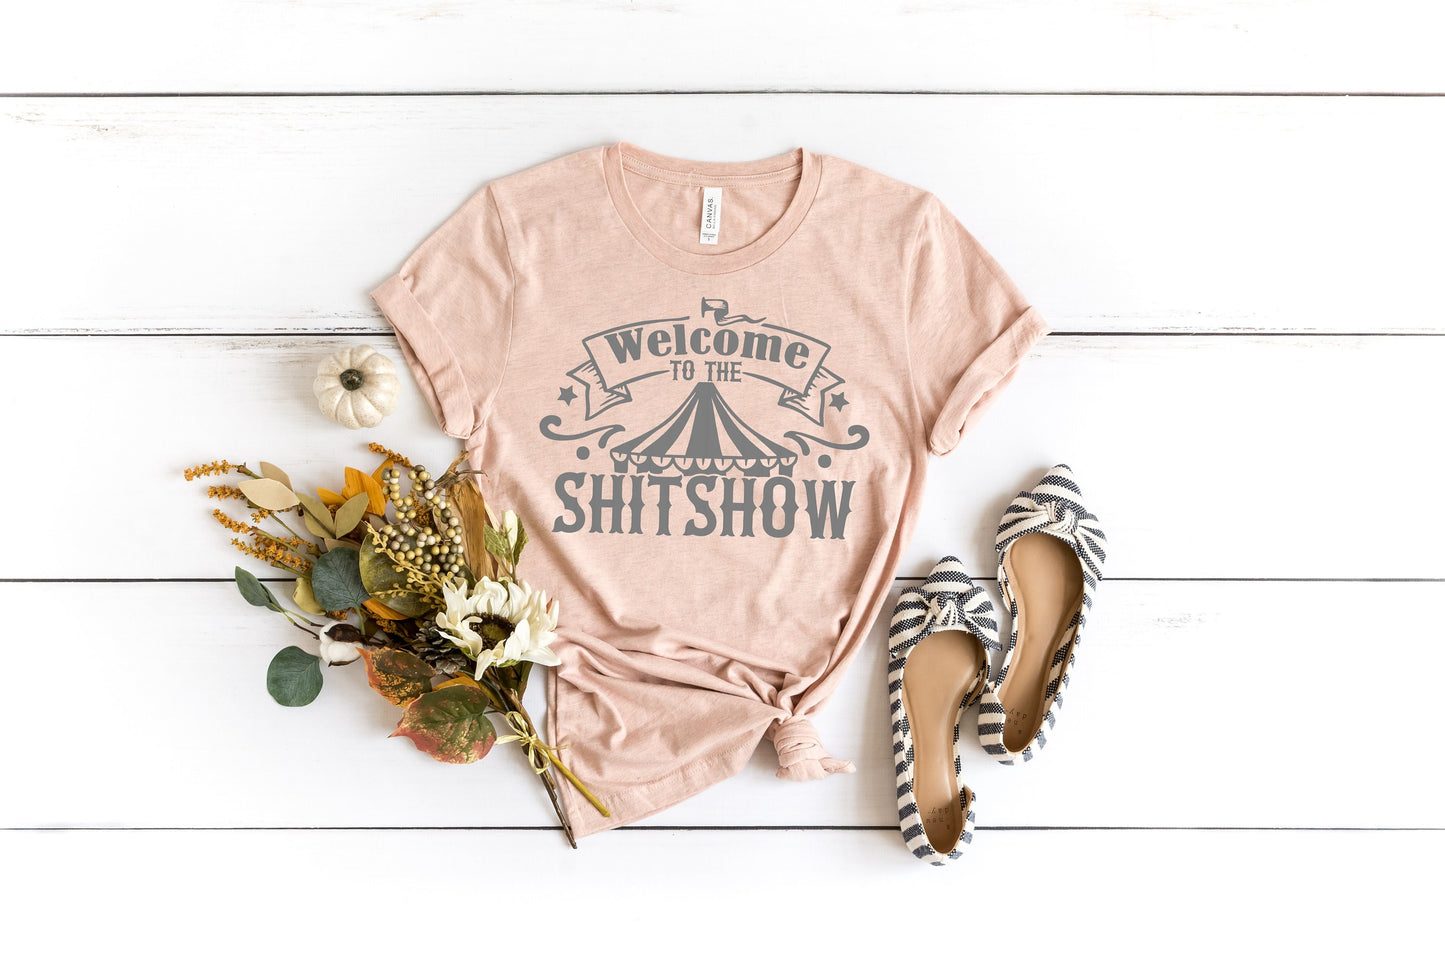 Welcome to the Shitshow unisex t-shirt - funny t-shirt - shirt for dad - shirt for mom - funny gifts - novelty t-shirt - offensive t-shirts